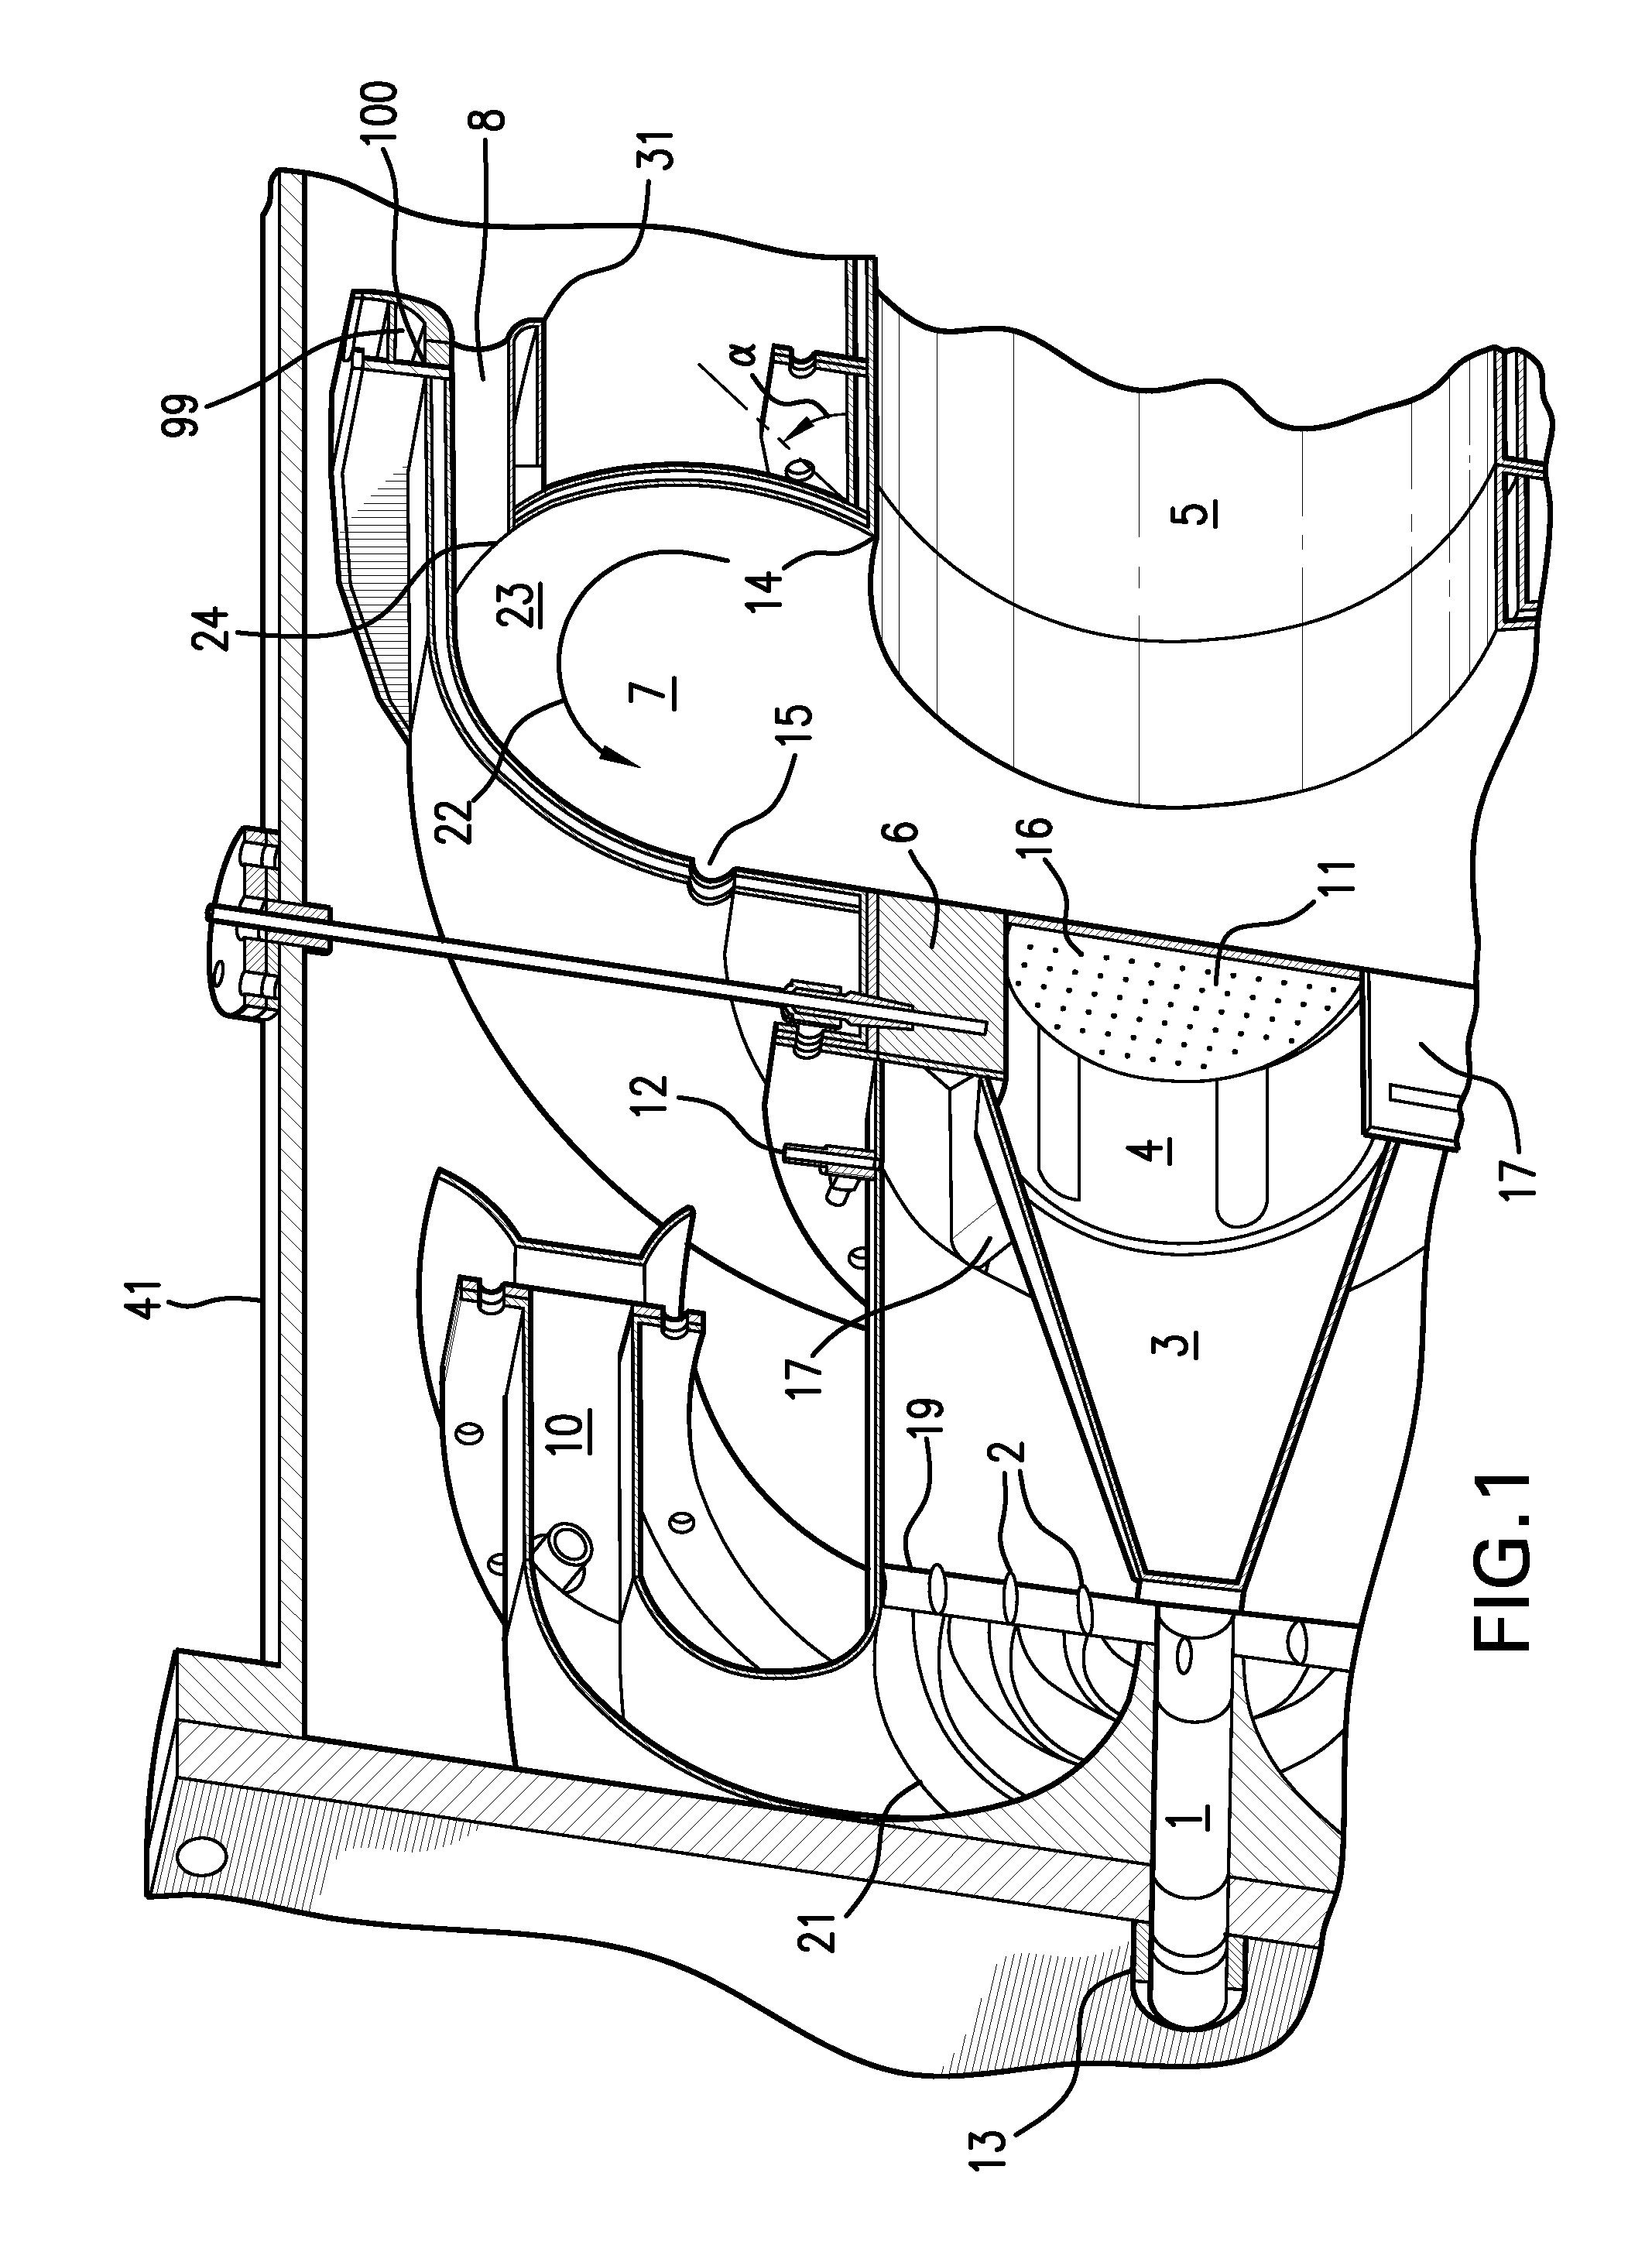 Inlet premixer for combustion apparatus